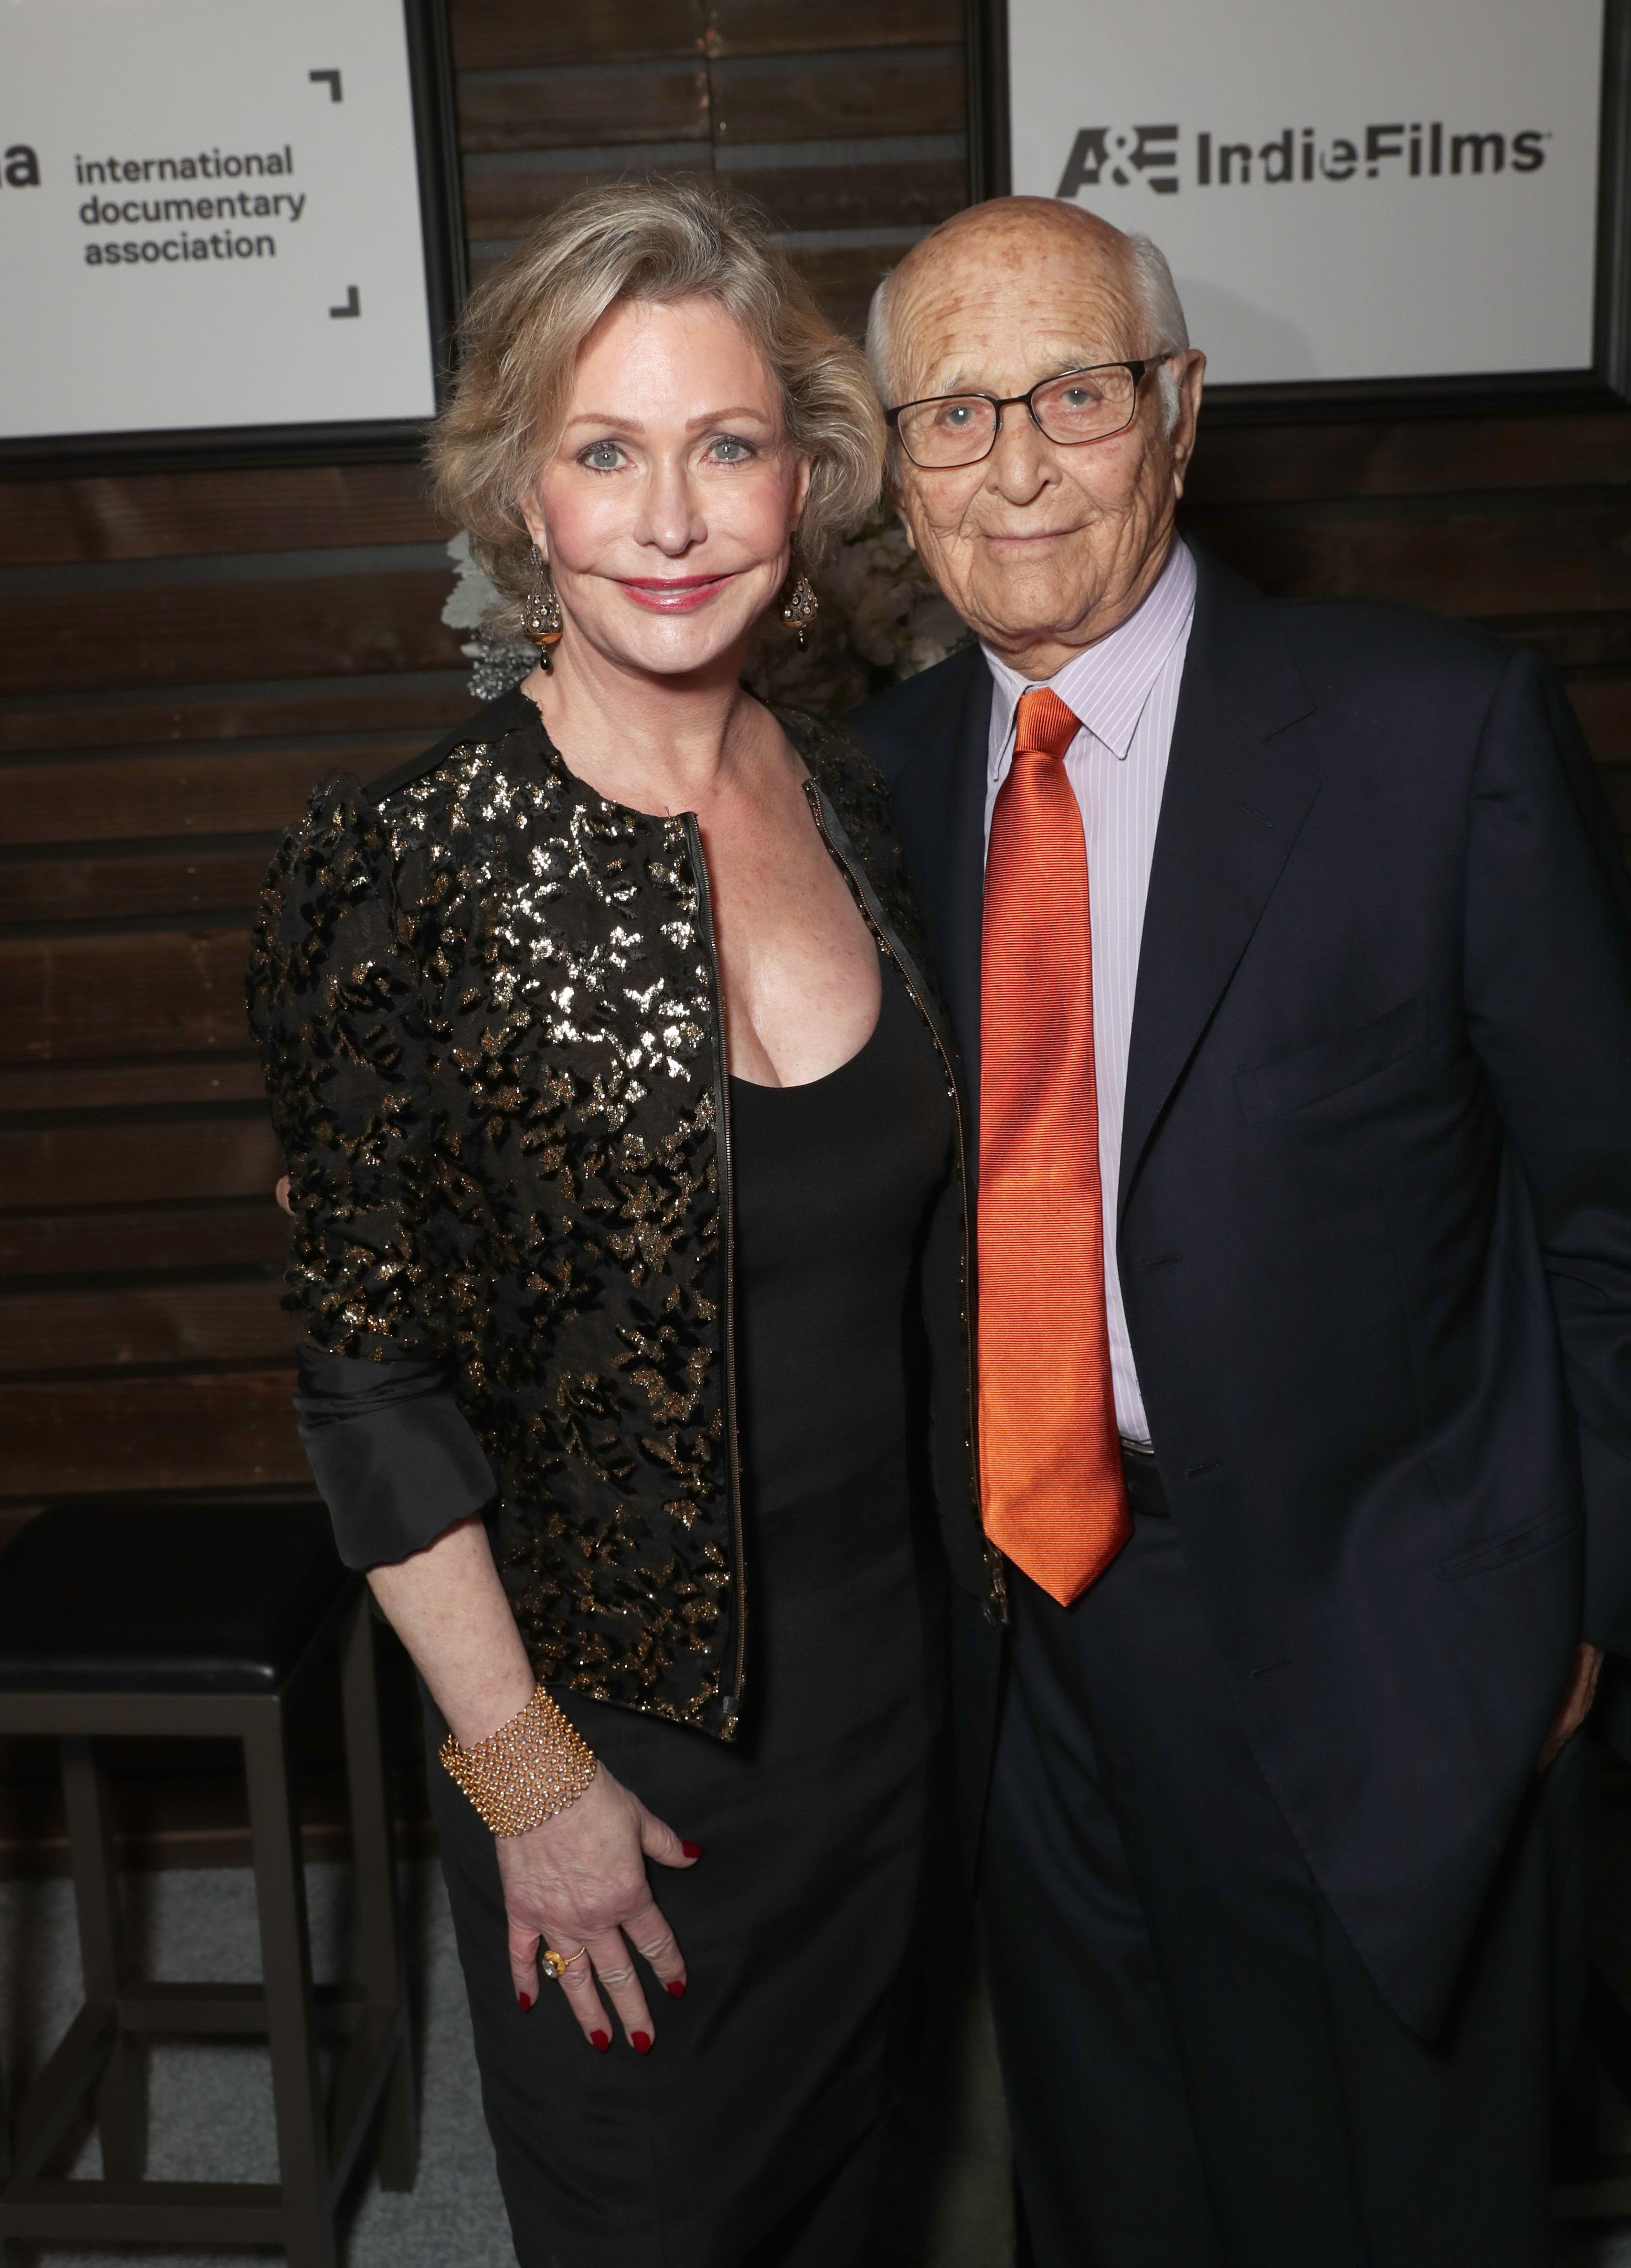 Lyn and Norman Lear at the 32nd Annual IDA Documentary Awards in 2016 in Hollywood | Source: getty Images